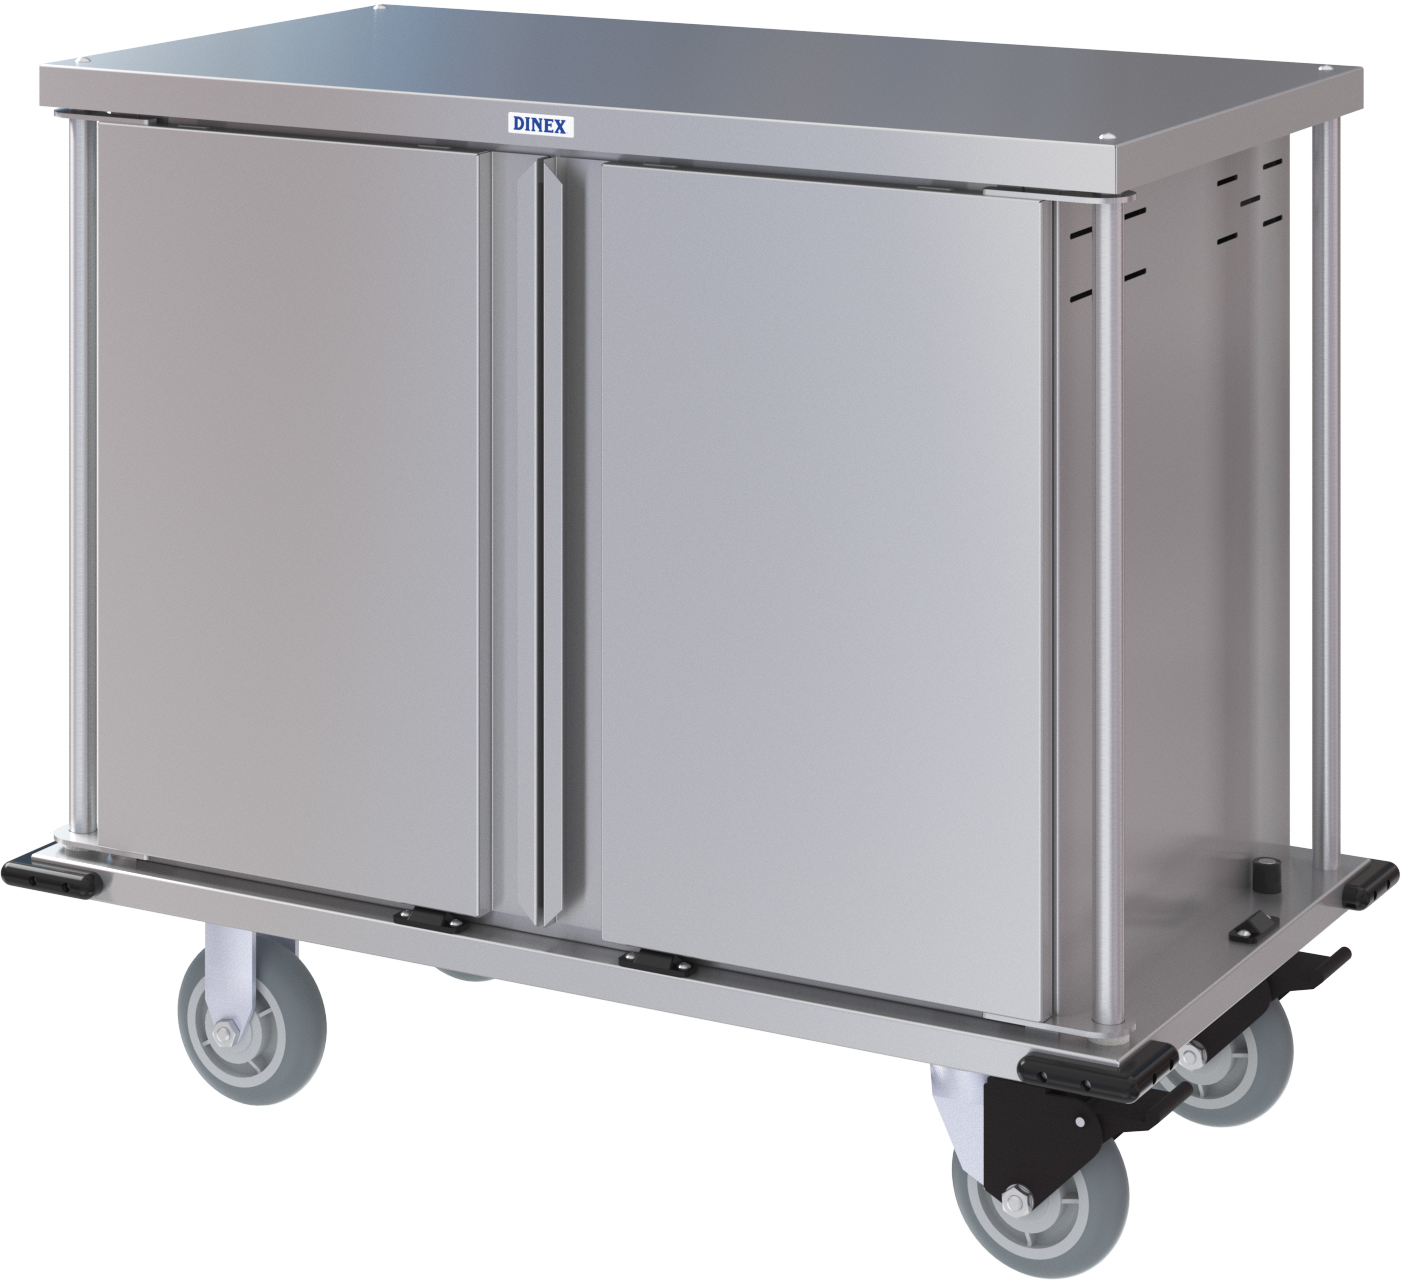 DXPTQC1T2D10 - Dinex® Totally Quiet Compact Meal Delivery Cart - Double Stainless Steel Cart With Doors